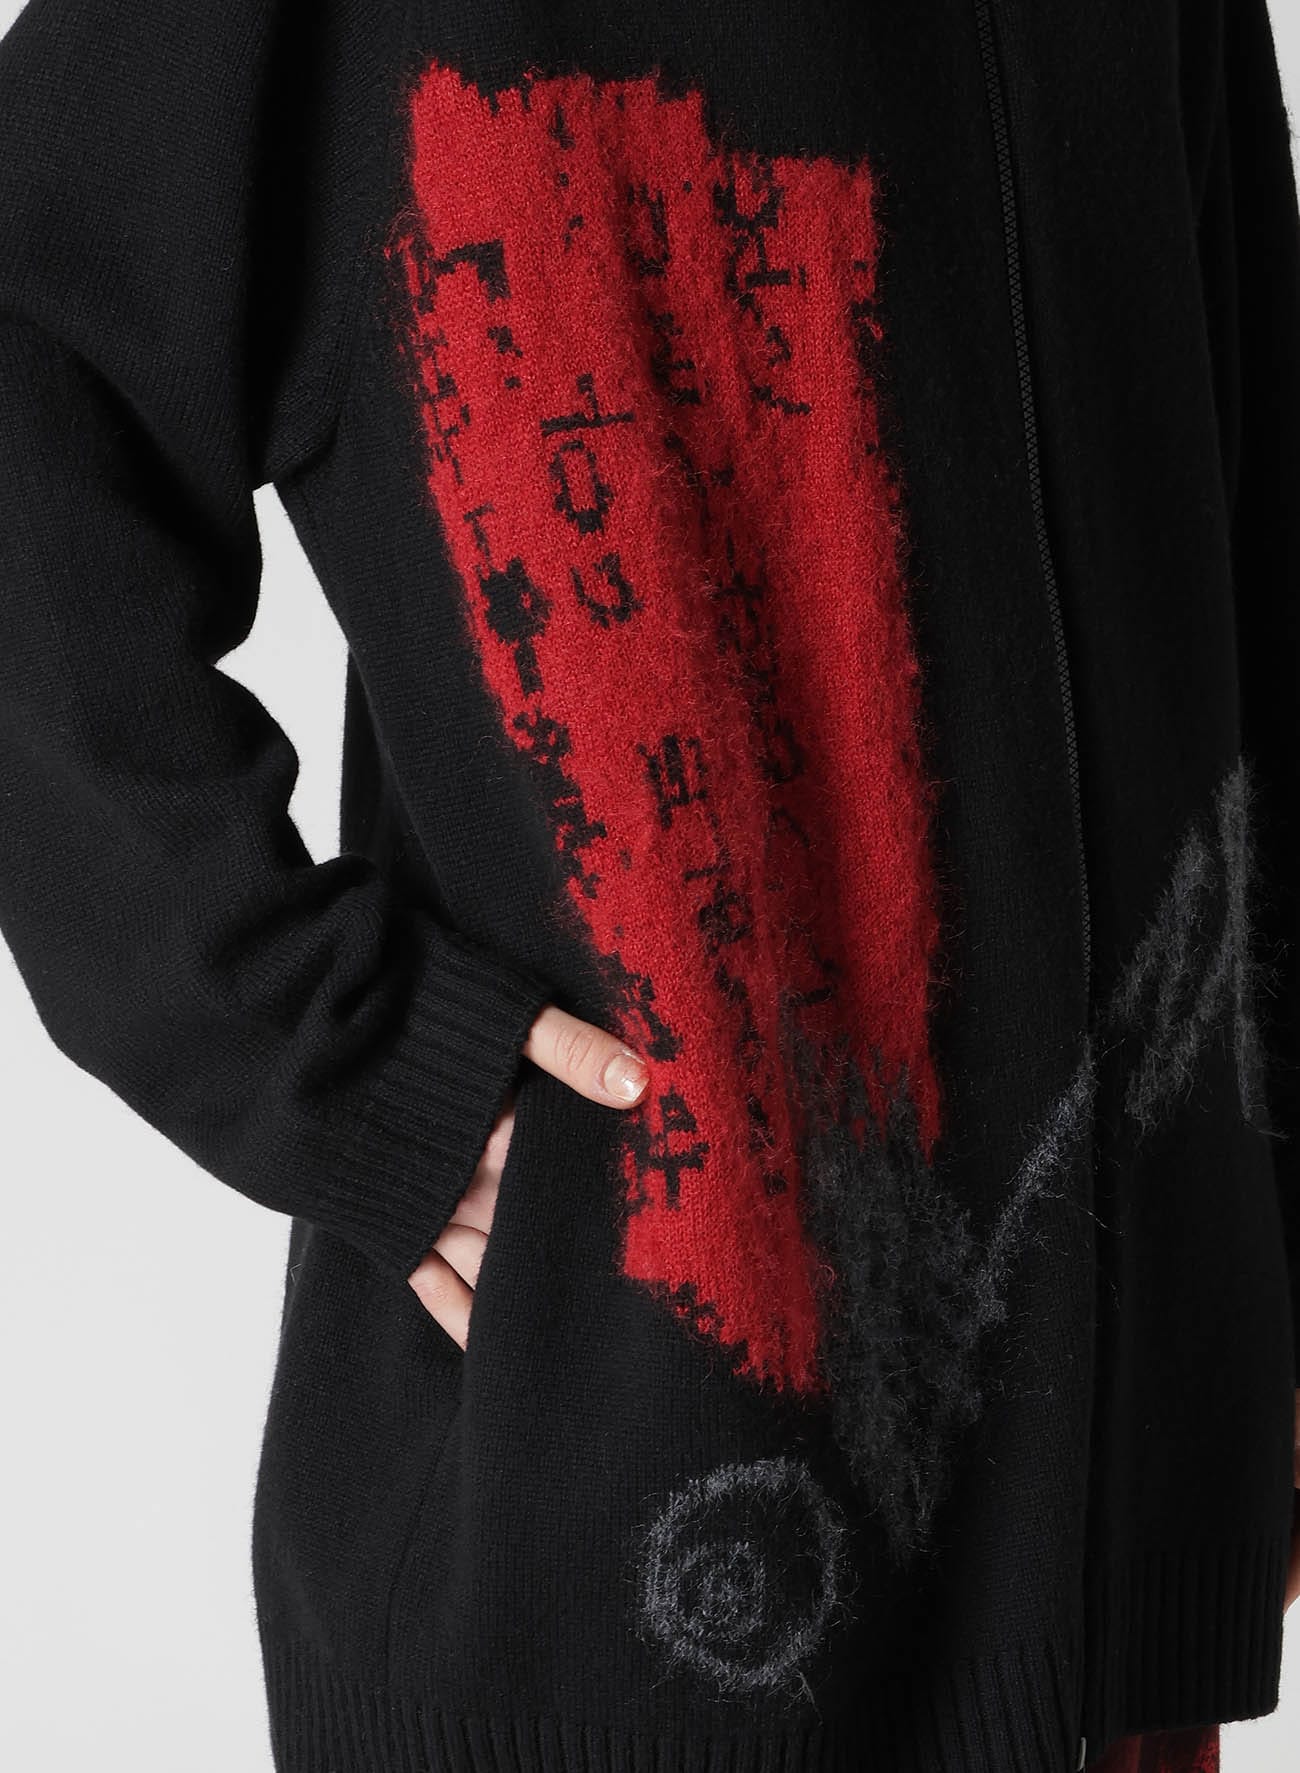 【7/26 12:00 Release】INTERSIA JACQUARD HIGH NECK PULOVER